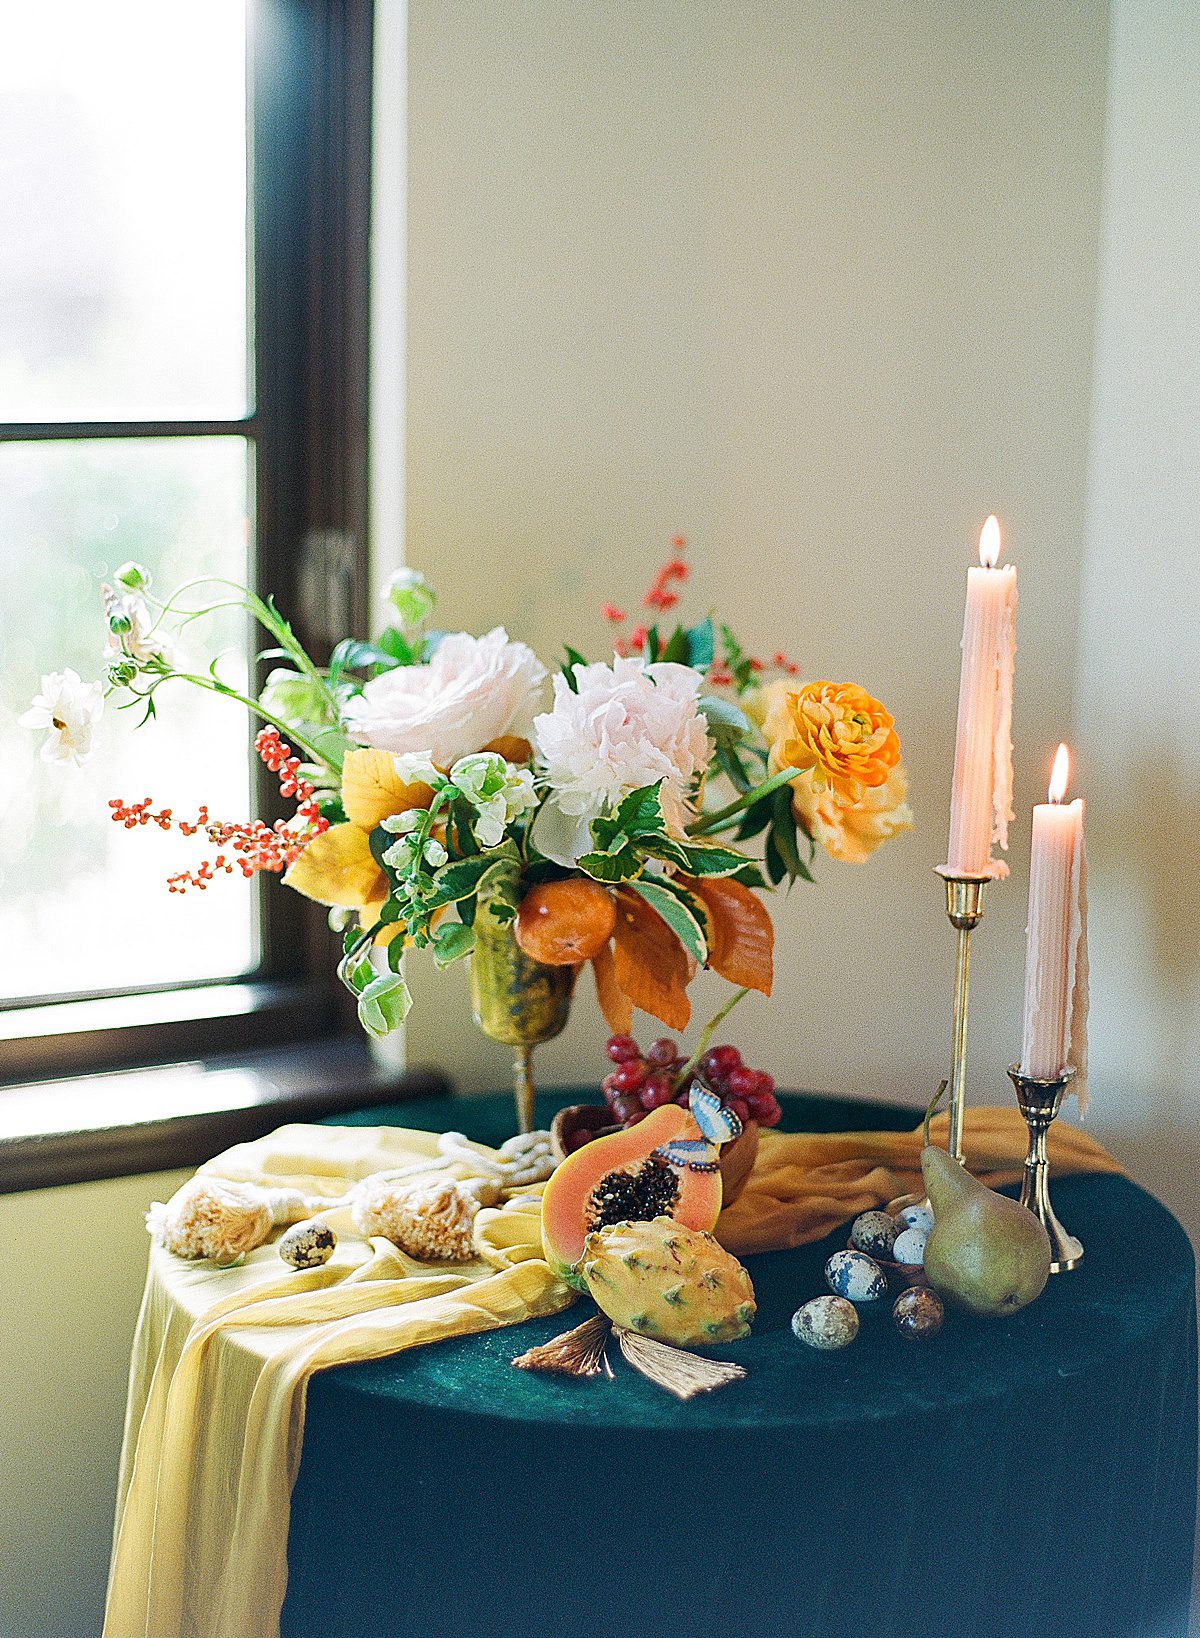 Dutch Inspired Still Life with Flowers Fruit and Candles Photo